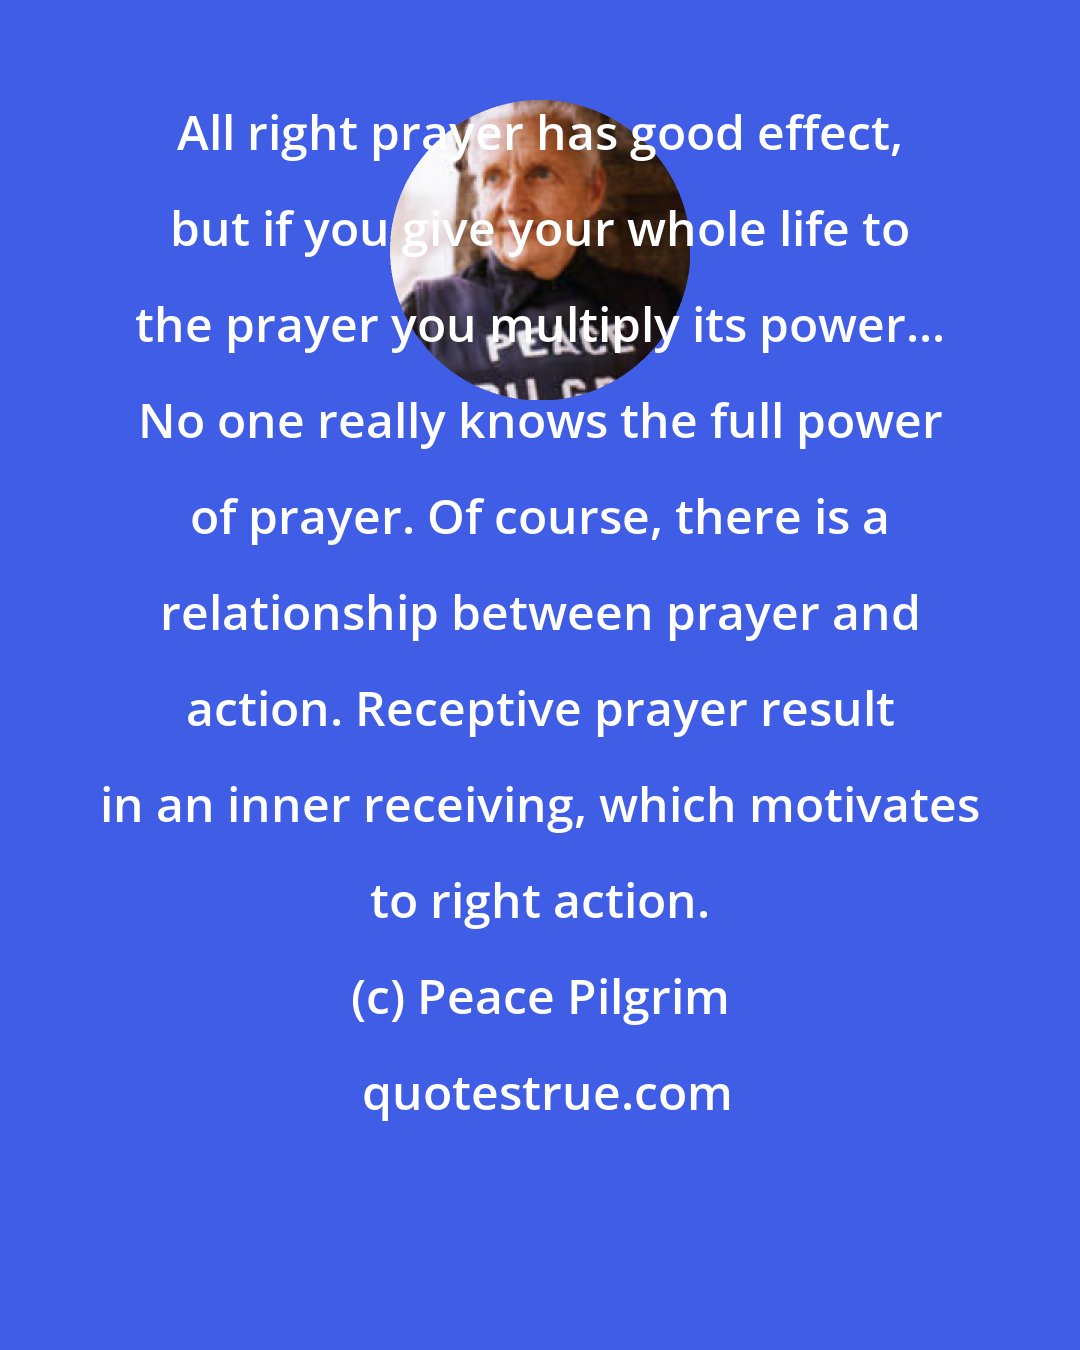 Peace Pilgrim: All right prayer has good effect, but if you give your whole life to the prayer you multiply its power... No one really knows the full power of prayer. Of course, there is a relationship between prayer and action. Receptive prayer result in an inner receiving, which motivates to right action.